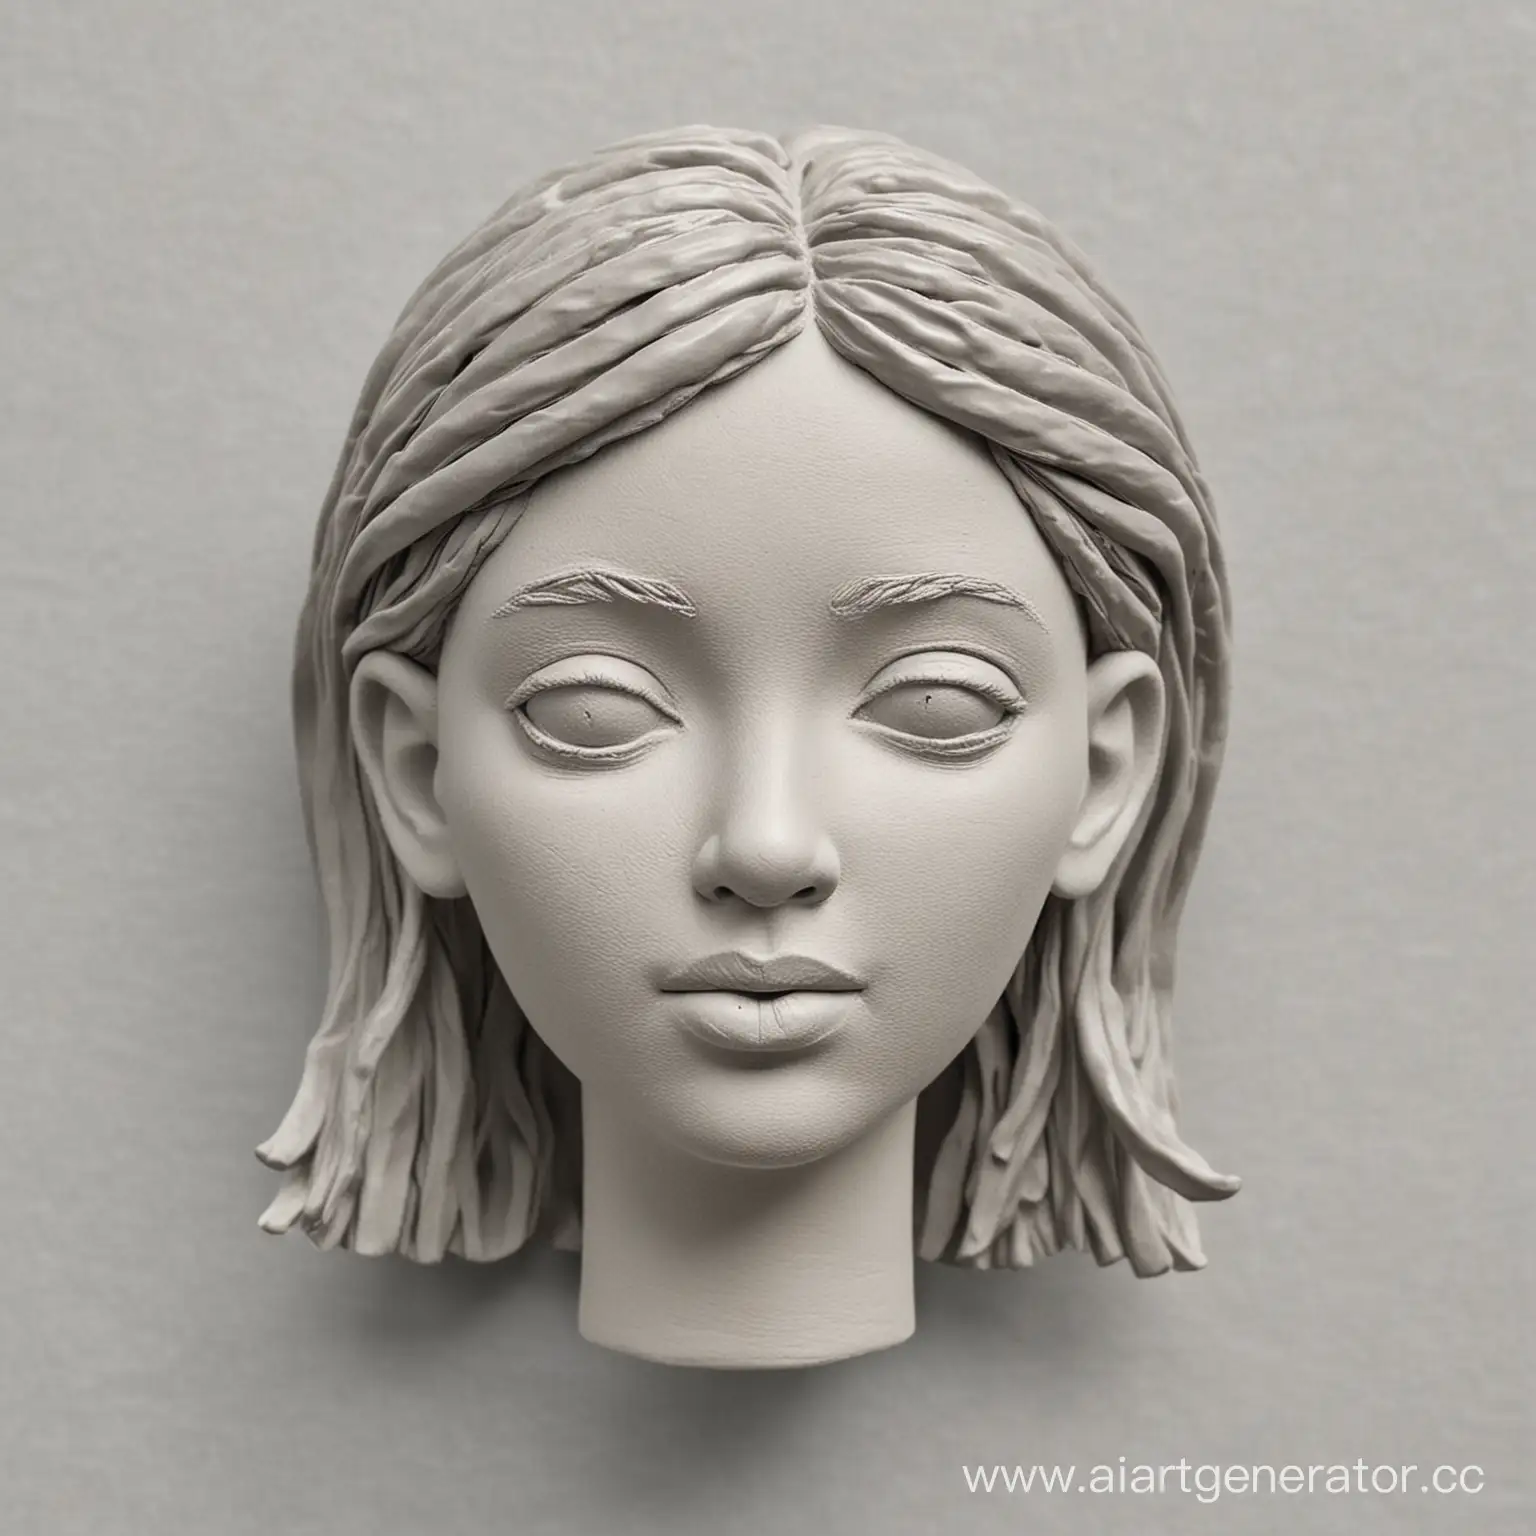 Portrait-of-a-Young-Woman-Sculpted-in-Gray-Plasticine